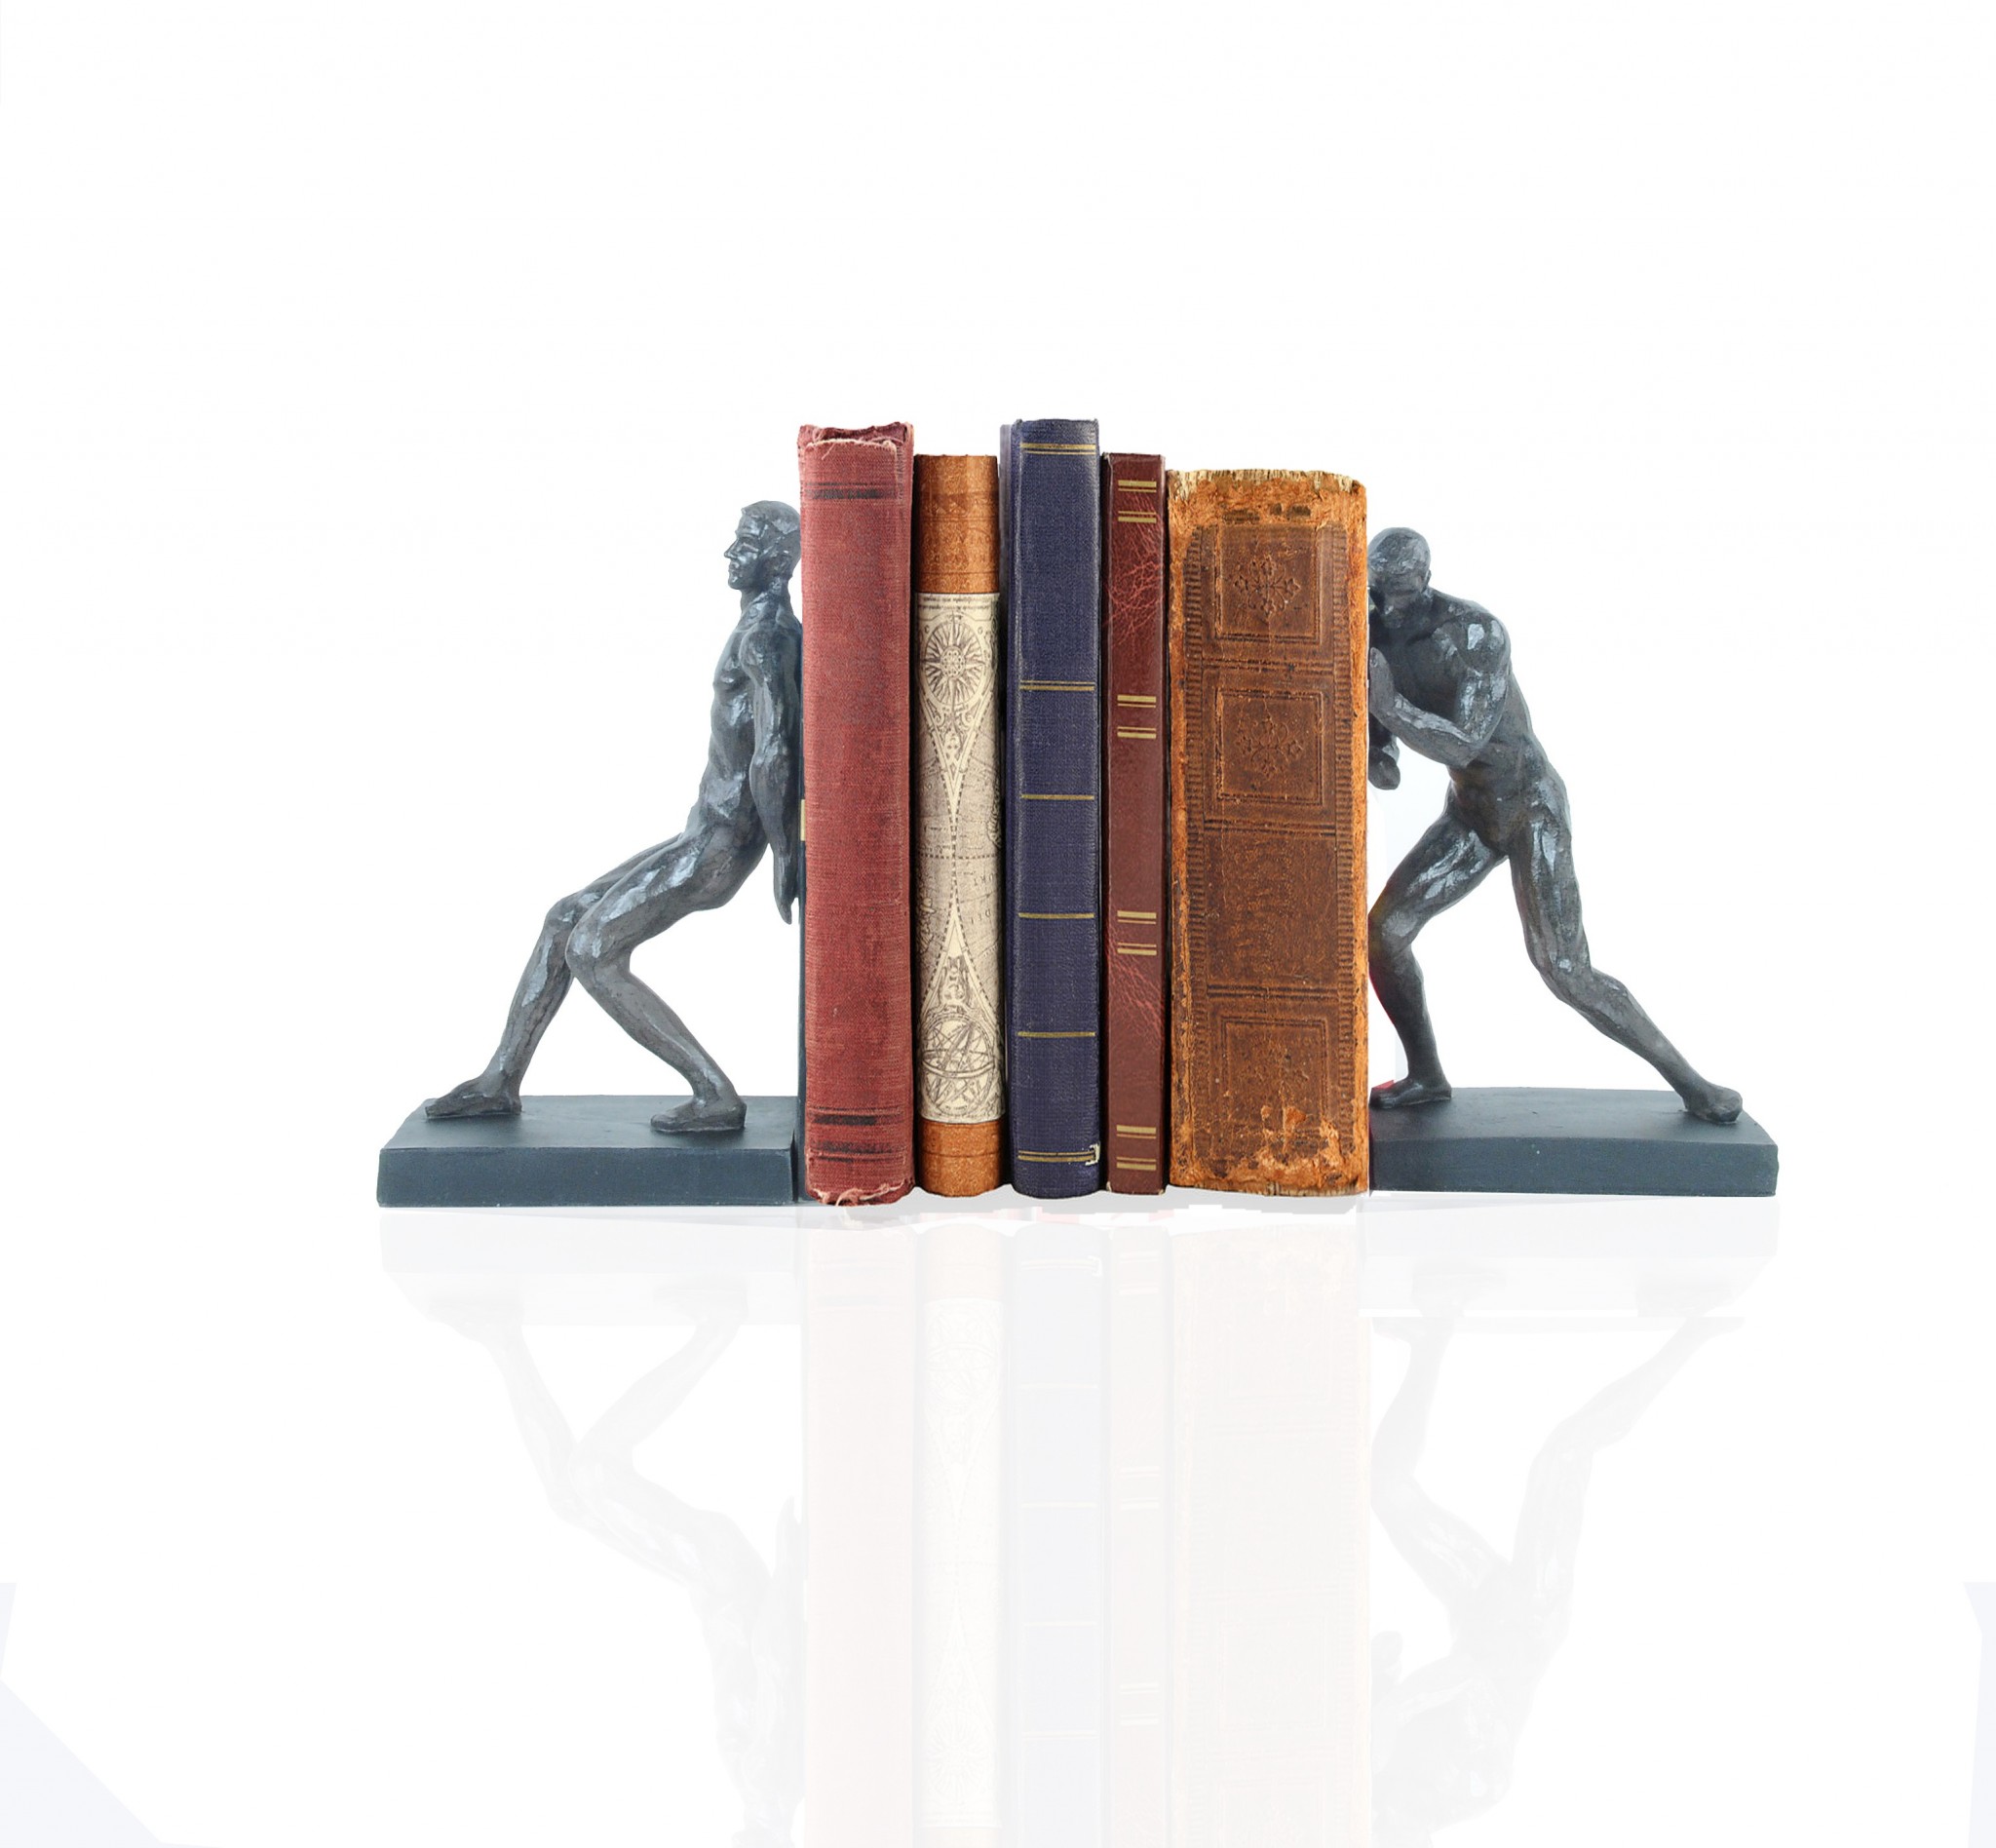 4.5" x 6" x 10.5" Gymnastic Man Bookend Set of 2